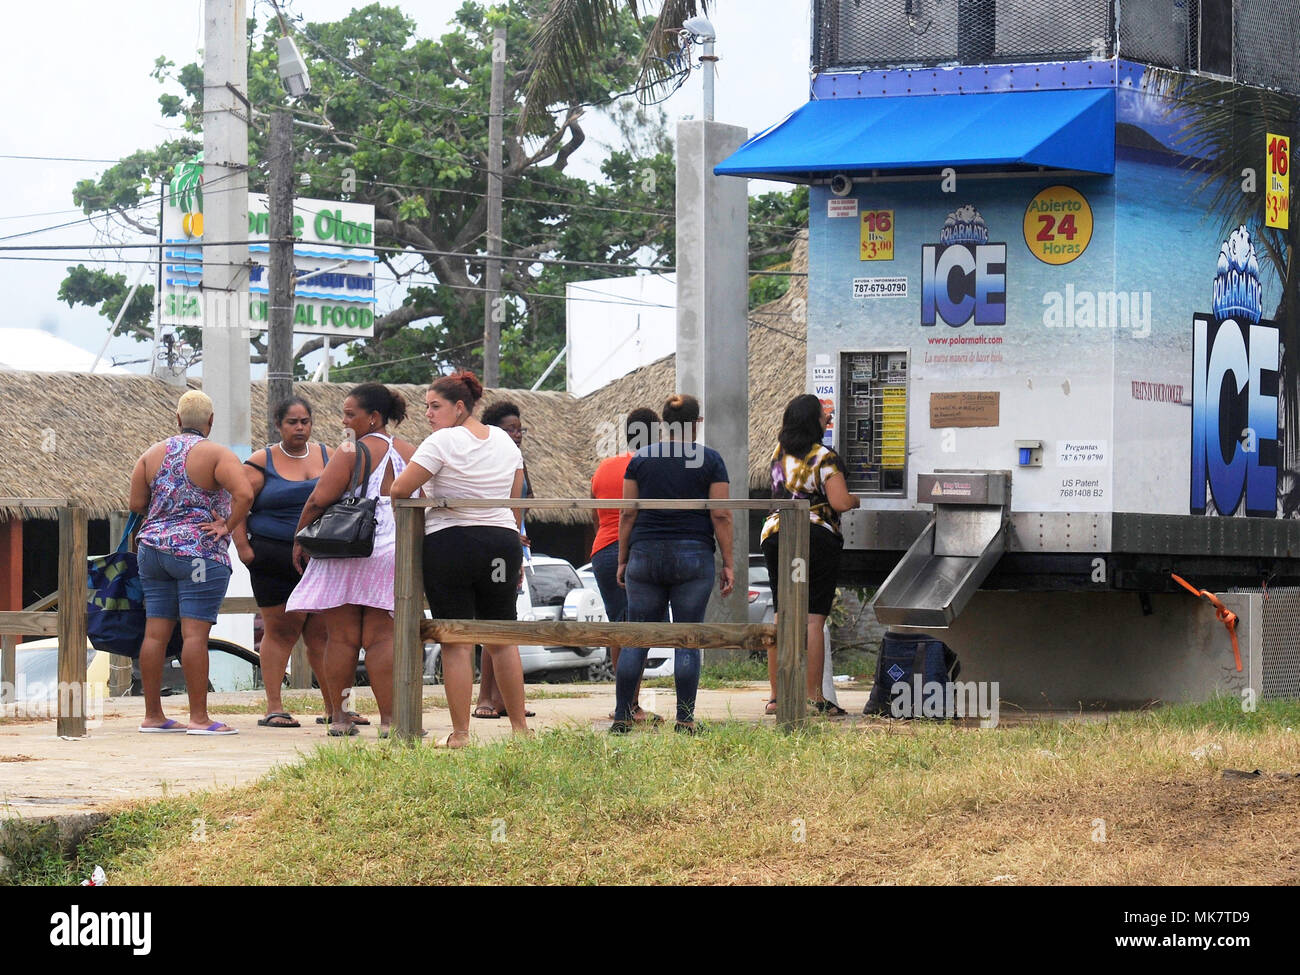 LOIZA, Puerto Rico – A group of women wait to purchase ice from a machine placed along PR187, near Playa Aviones, on Nov. 20, exactly two months after Hurricane Maria struck Puerto Rico. The Category 5 hurricane made landfall on Sept. 20, causing widespread damage to nearly every part of this U.S. island territory. Stock Photo